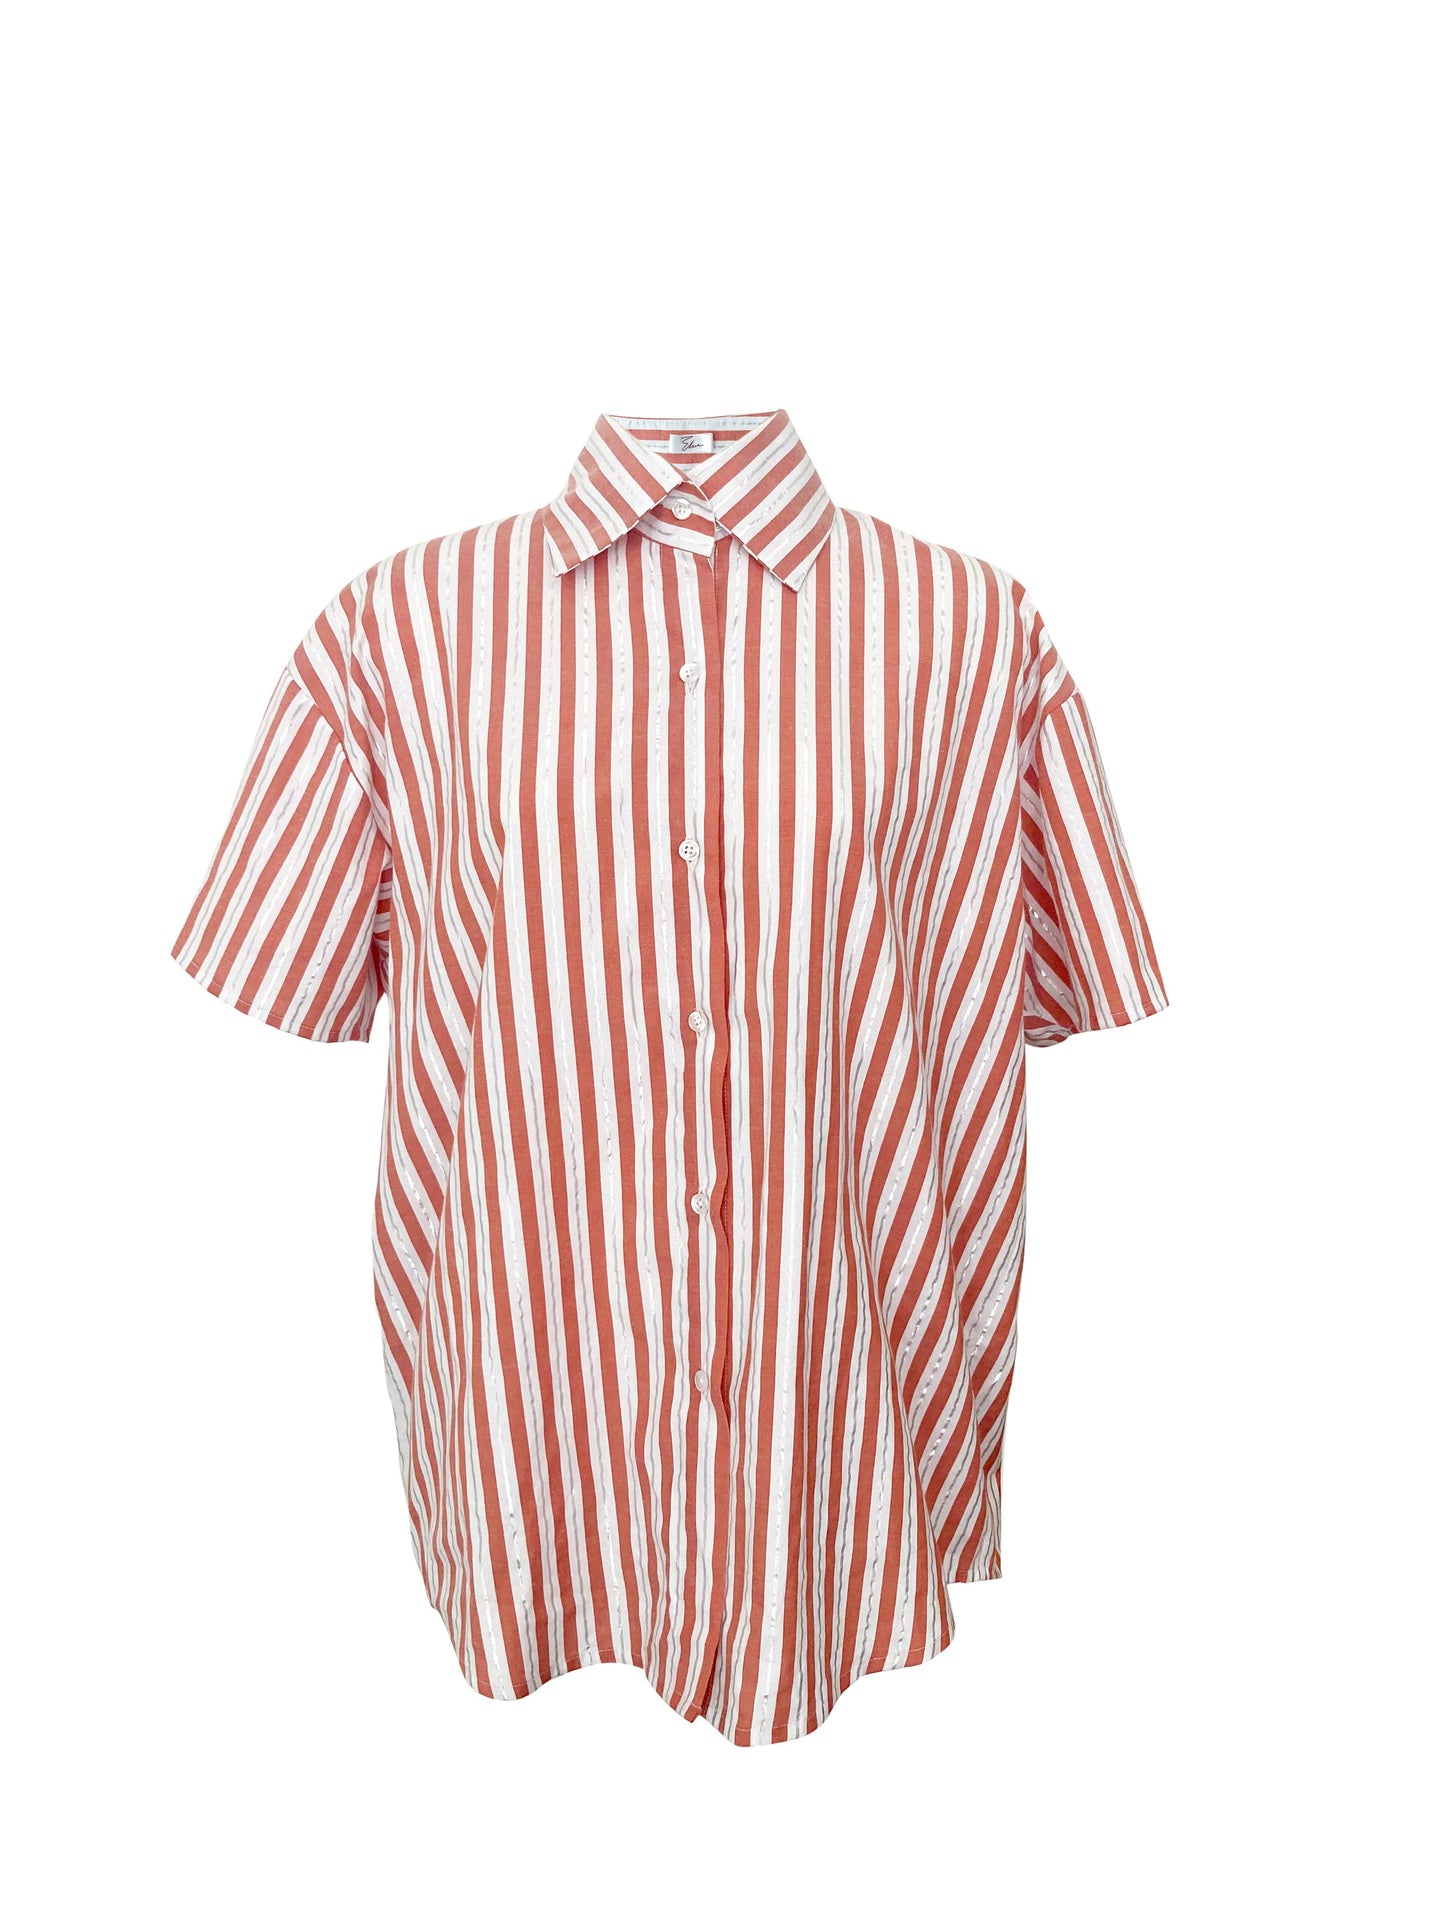 JOAN SHIRT - PINK STRIPED - LIMITED EDITION